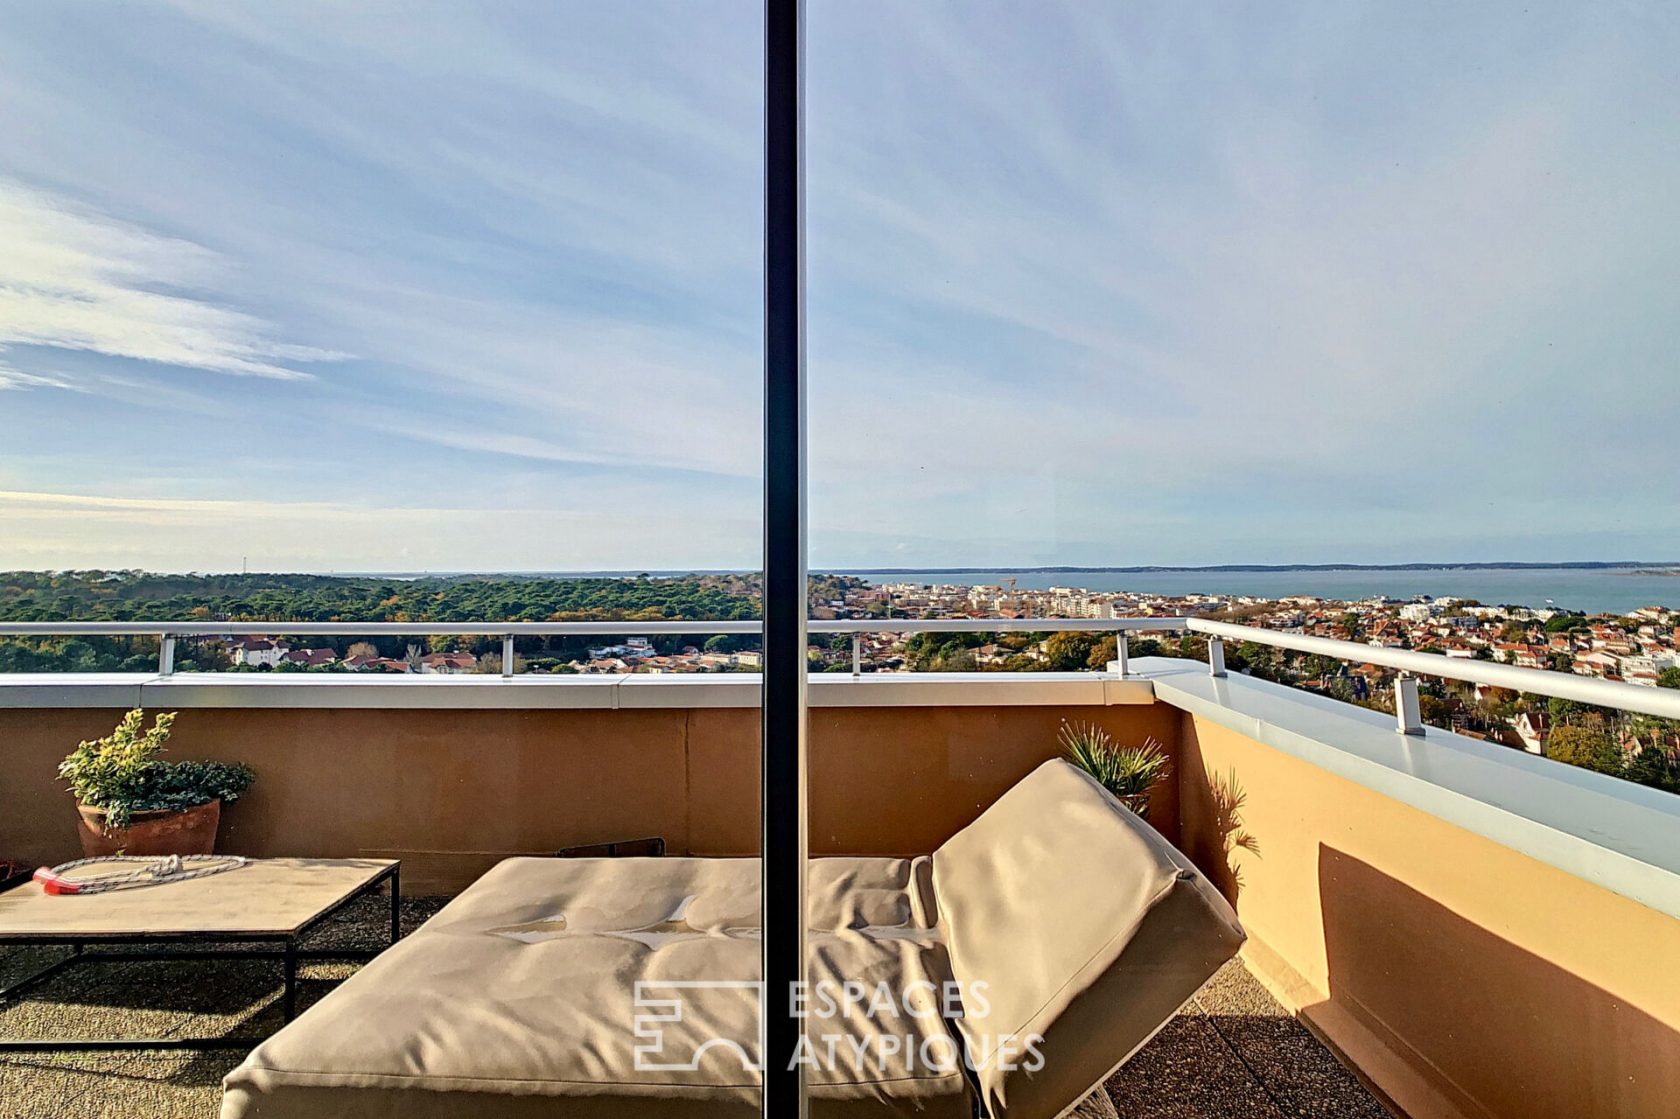 Penthouse with panoramic view of the Basin